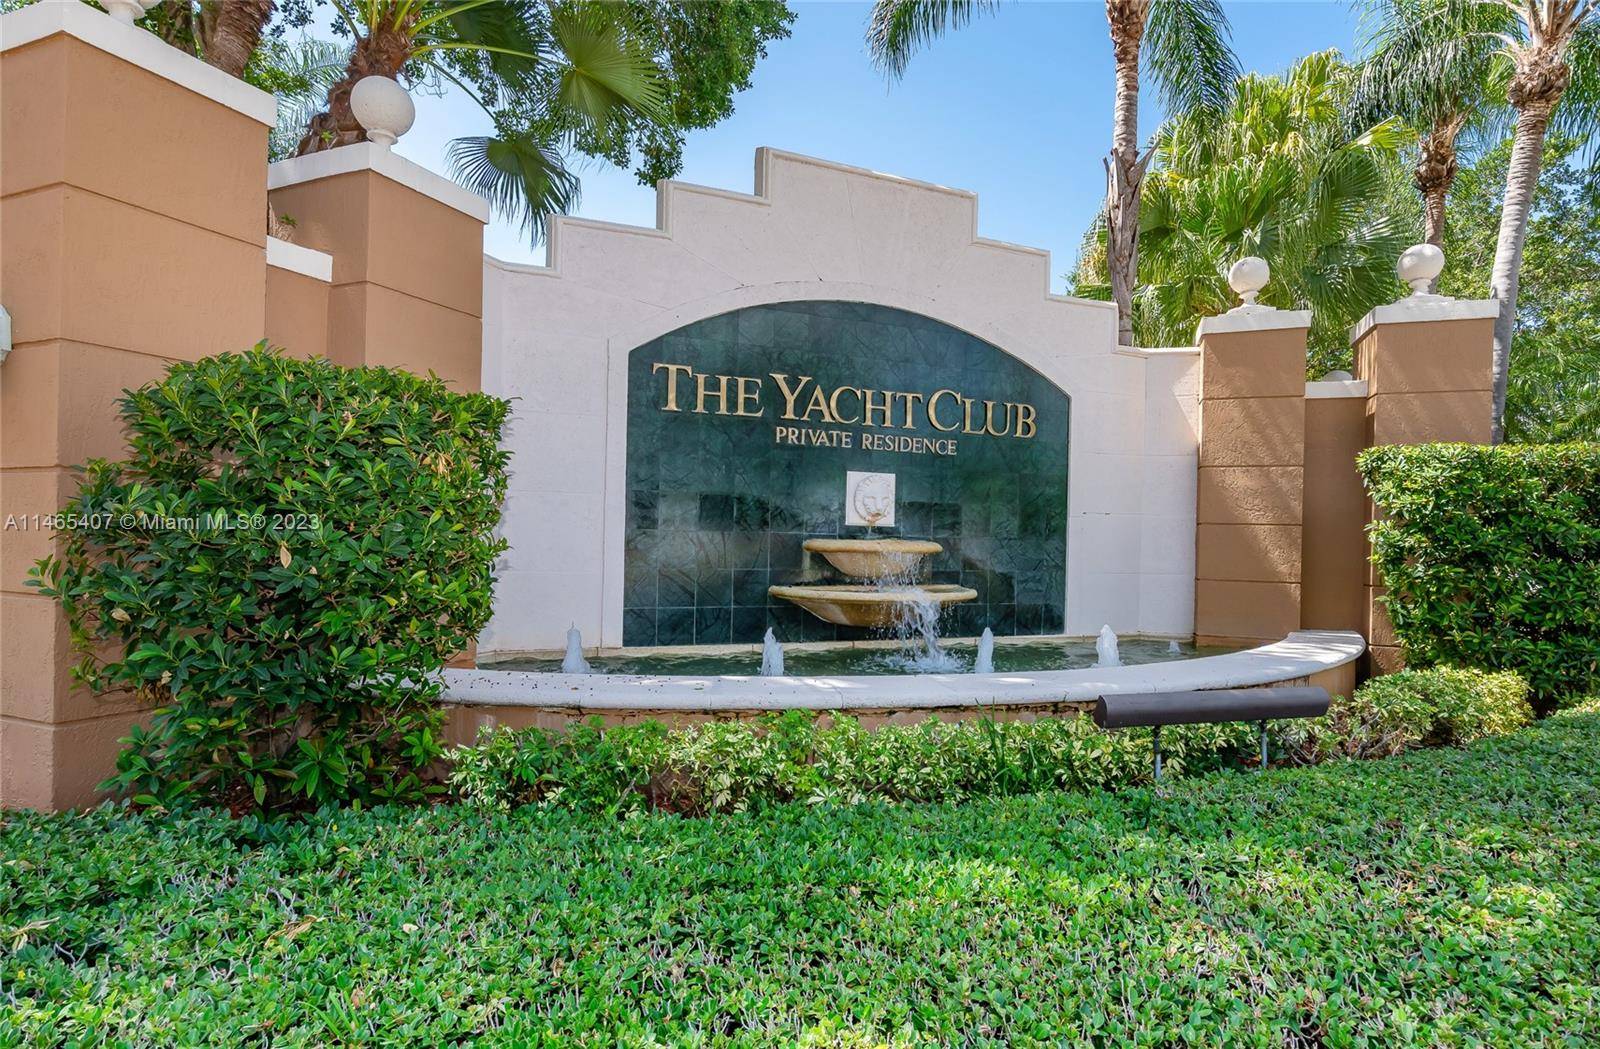 YEAR LEASE WANTED Bright and spacious fully furnished second floor 2 BEDS 2 BATHS apartment at prestigious and sought after THE YACHT CLUB AT AVENTURA.